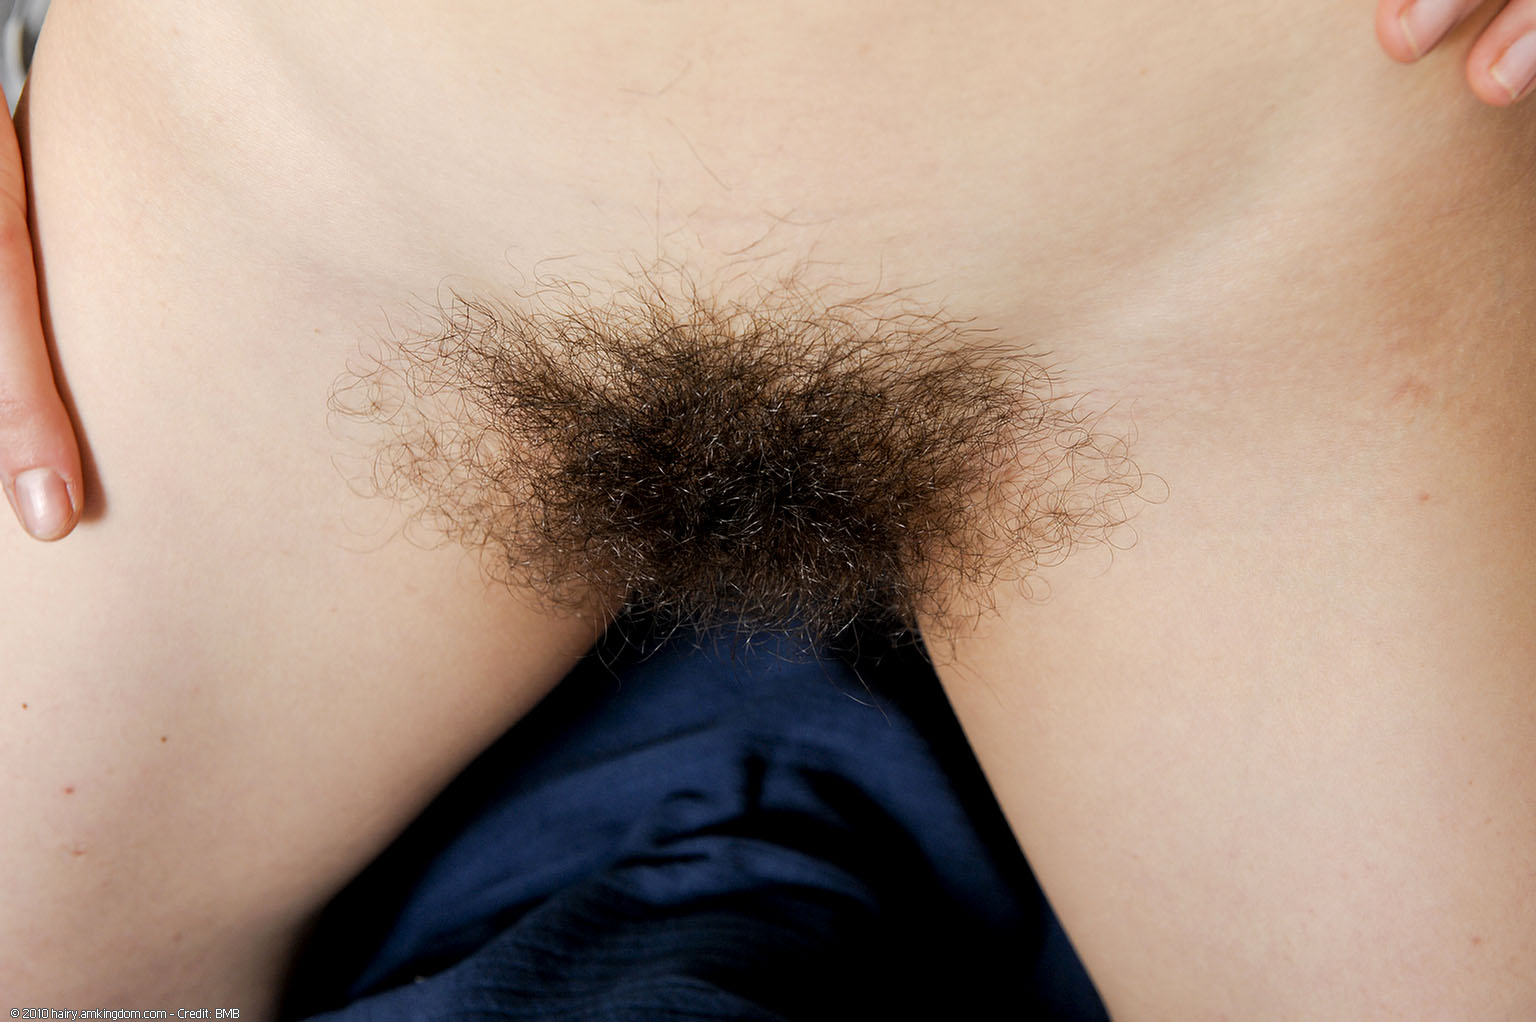 Jeff Atk Natural Hairy « ATK Natural And Hairy « Free ATK Pictures @ Bravo ATK